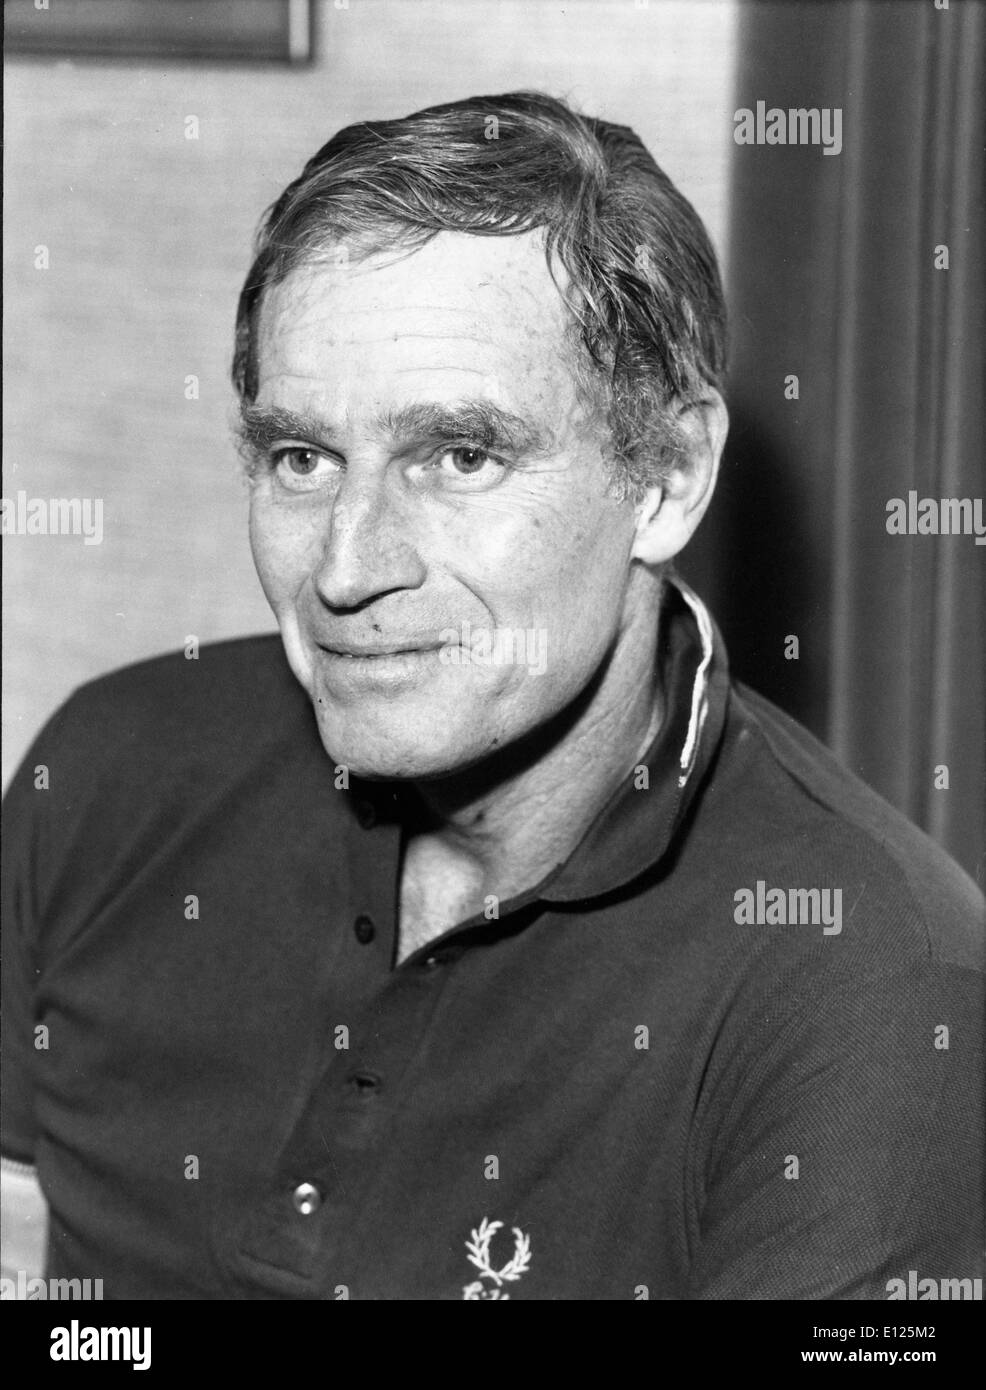 May 14, 1988; Madrid, Spain; Actor CHARLTON HESTON known for his religious roles in 'Ben-Hur' and 'The Ten Commandments'. Stock Photo